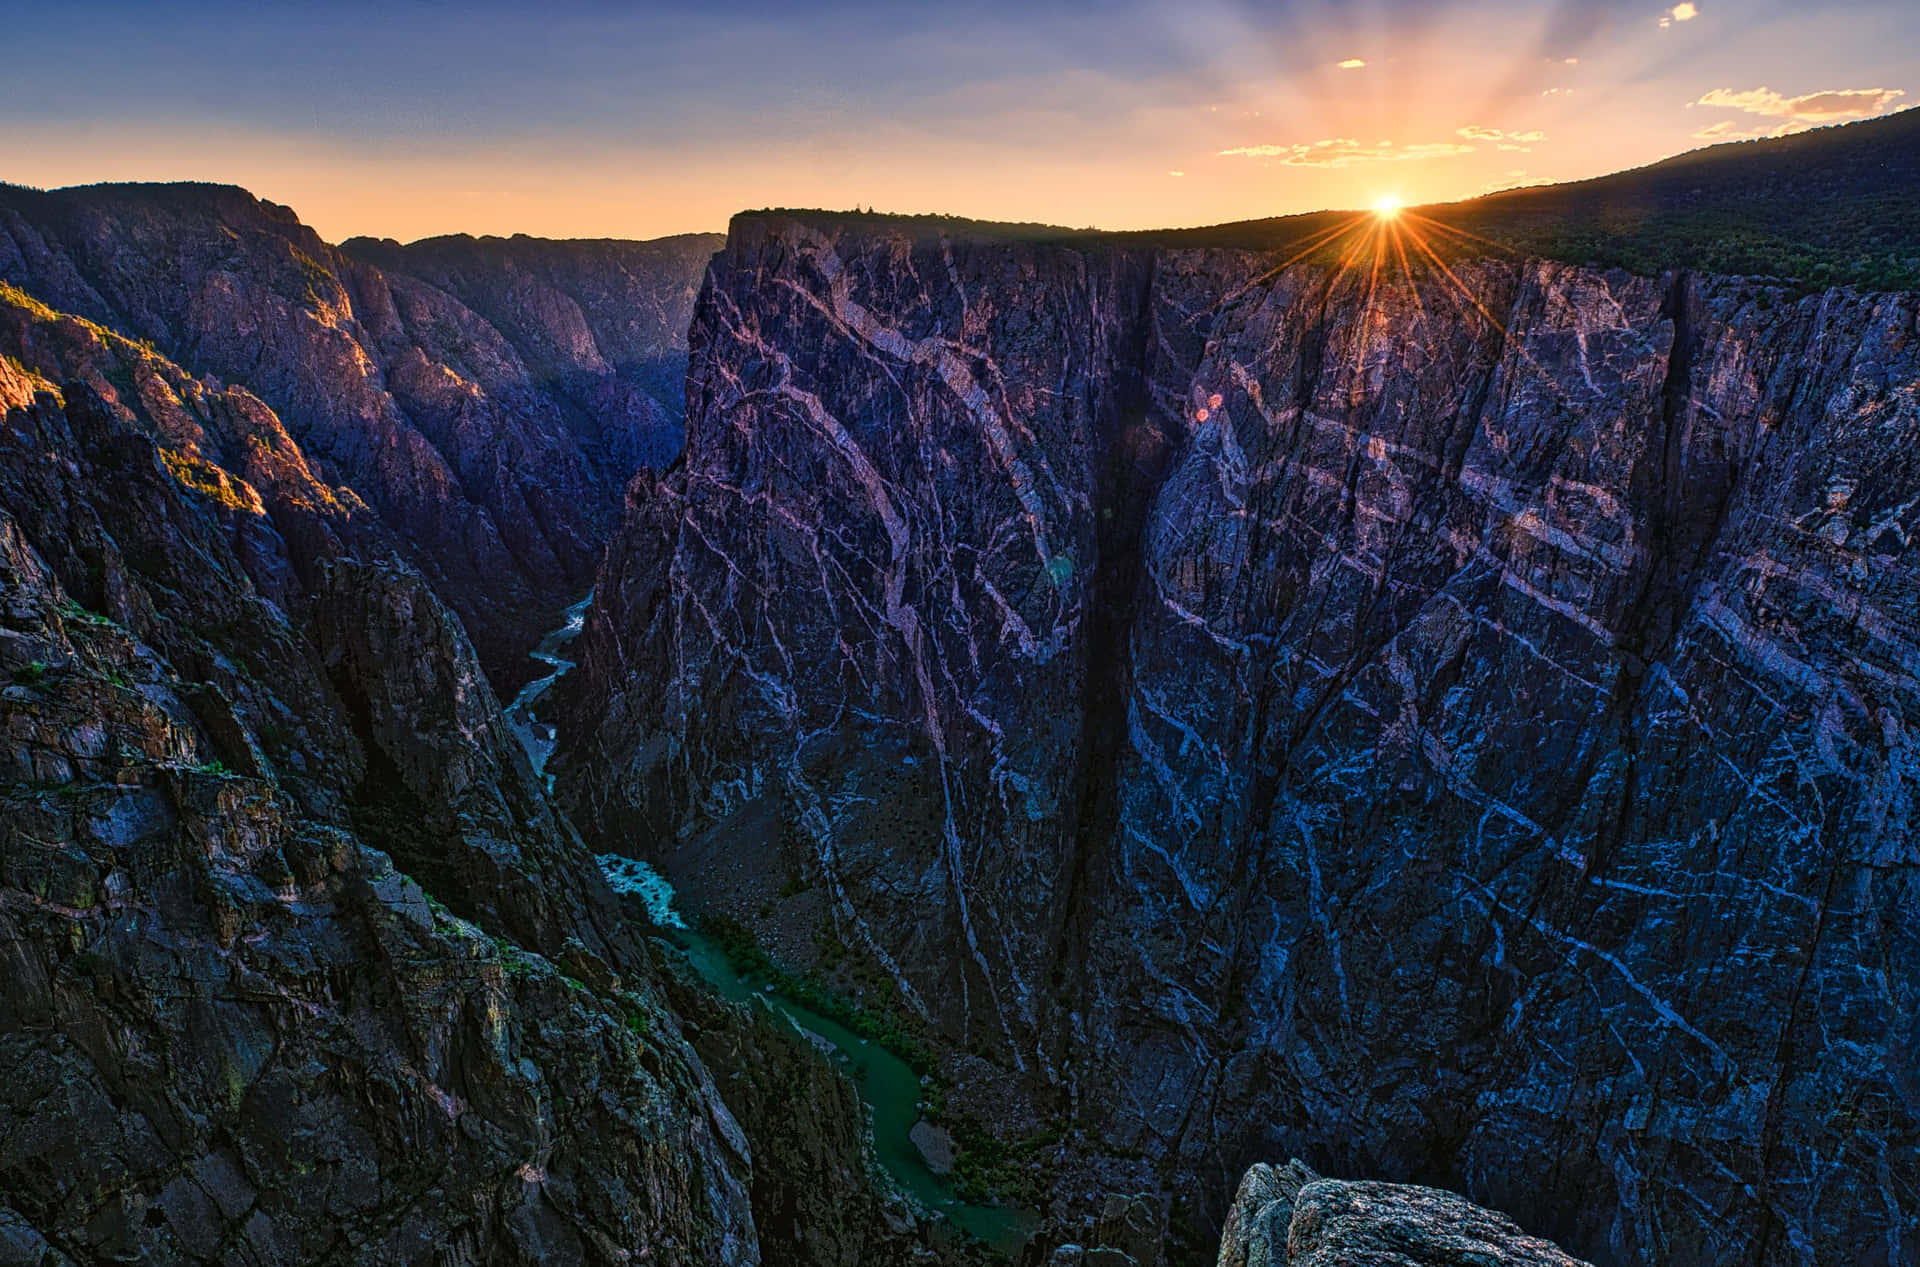 Explore the depths of Black Canyon, a deep and beautiful ravine in Arizona. Wallpaper